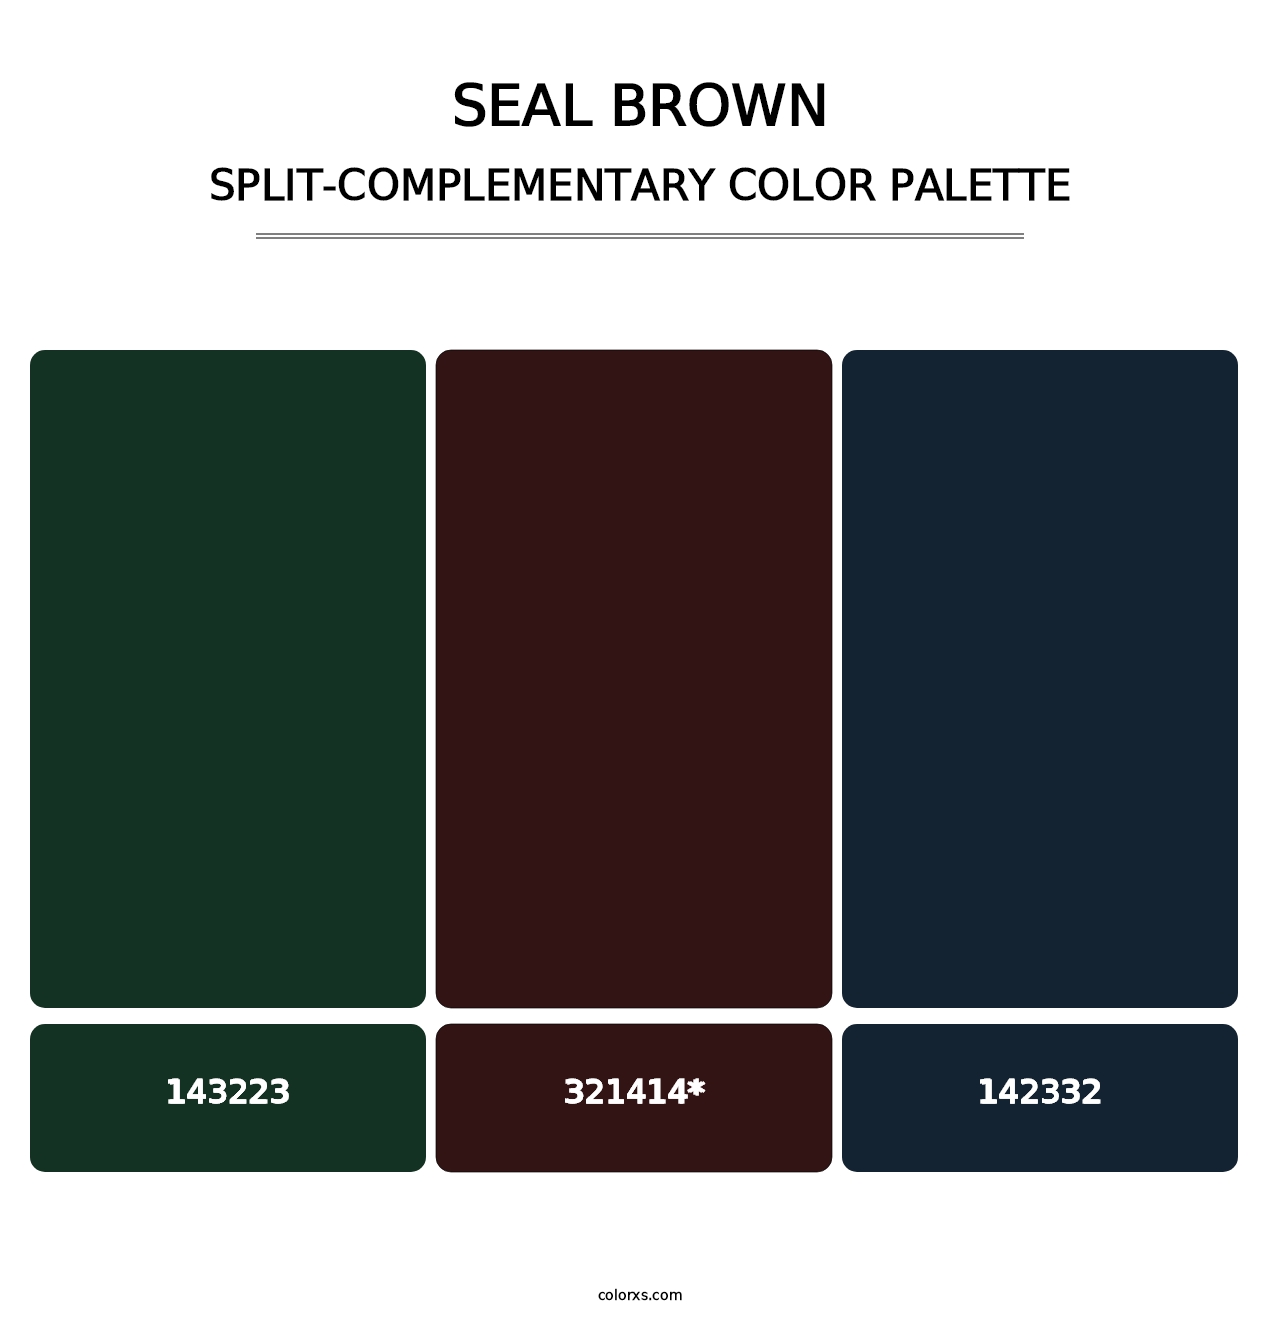 Seal brown - Split-Complementary Color Palette